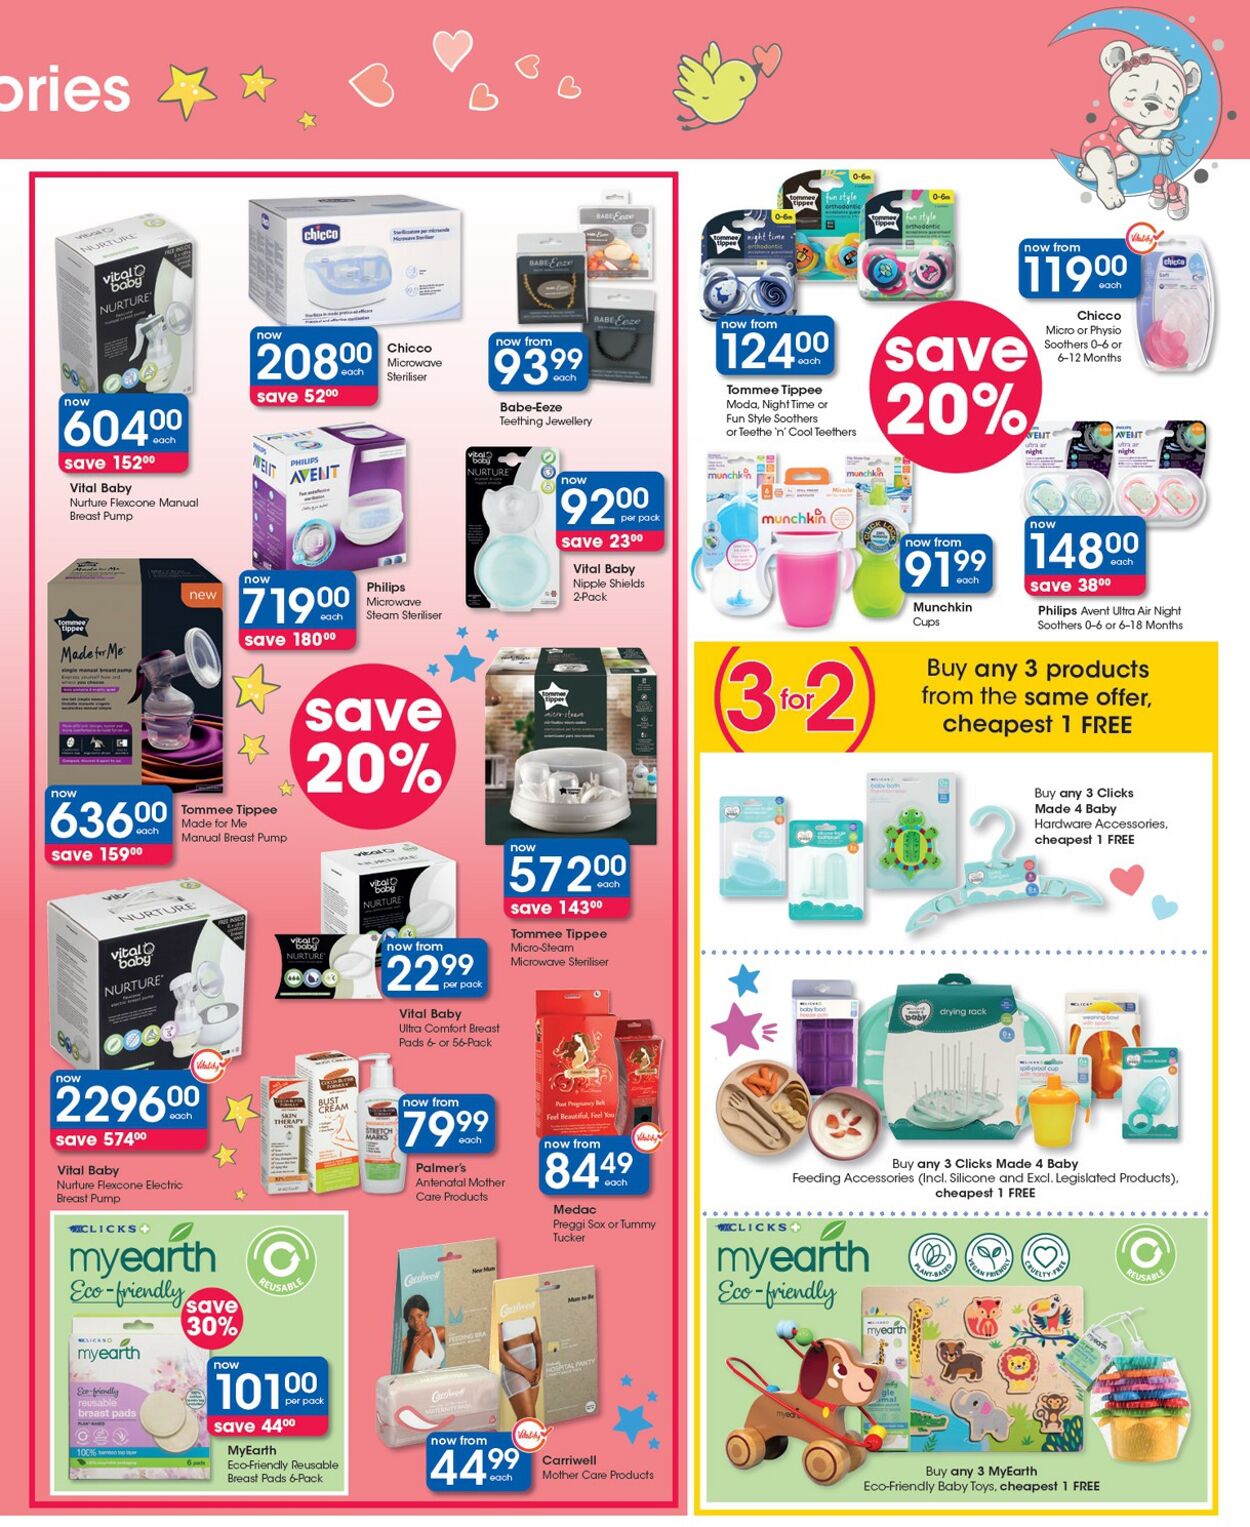 Clicks Promotional Leaflet - Valid from 19.10 to 02.11 - Page nb 1